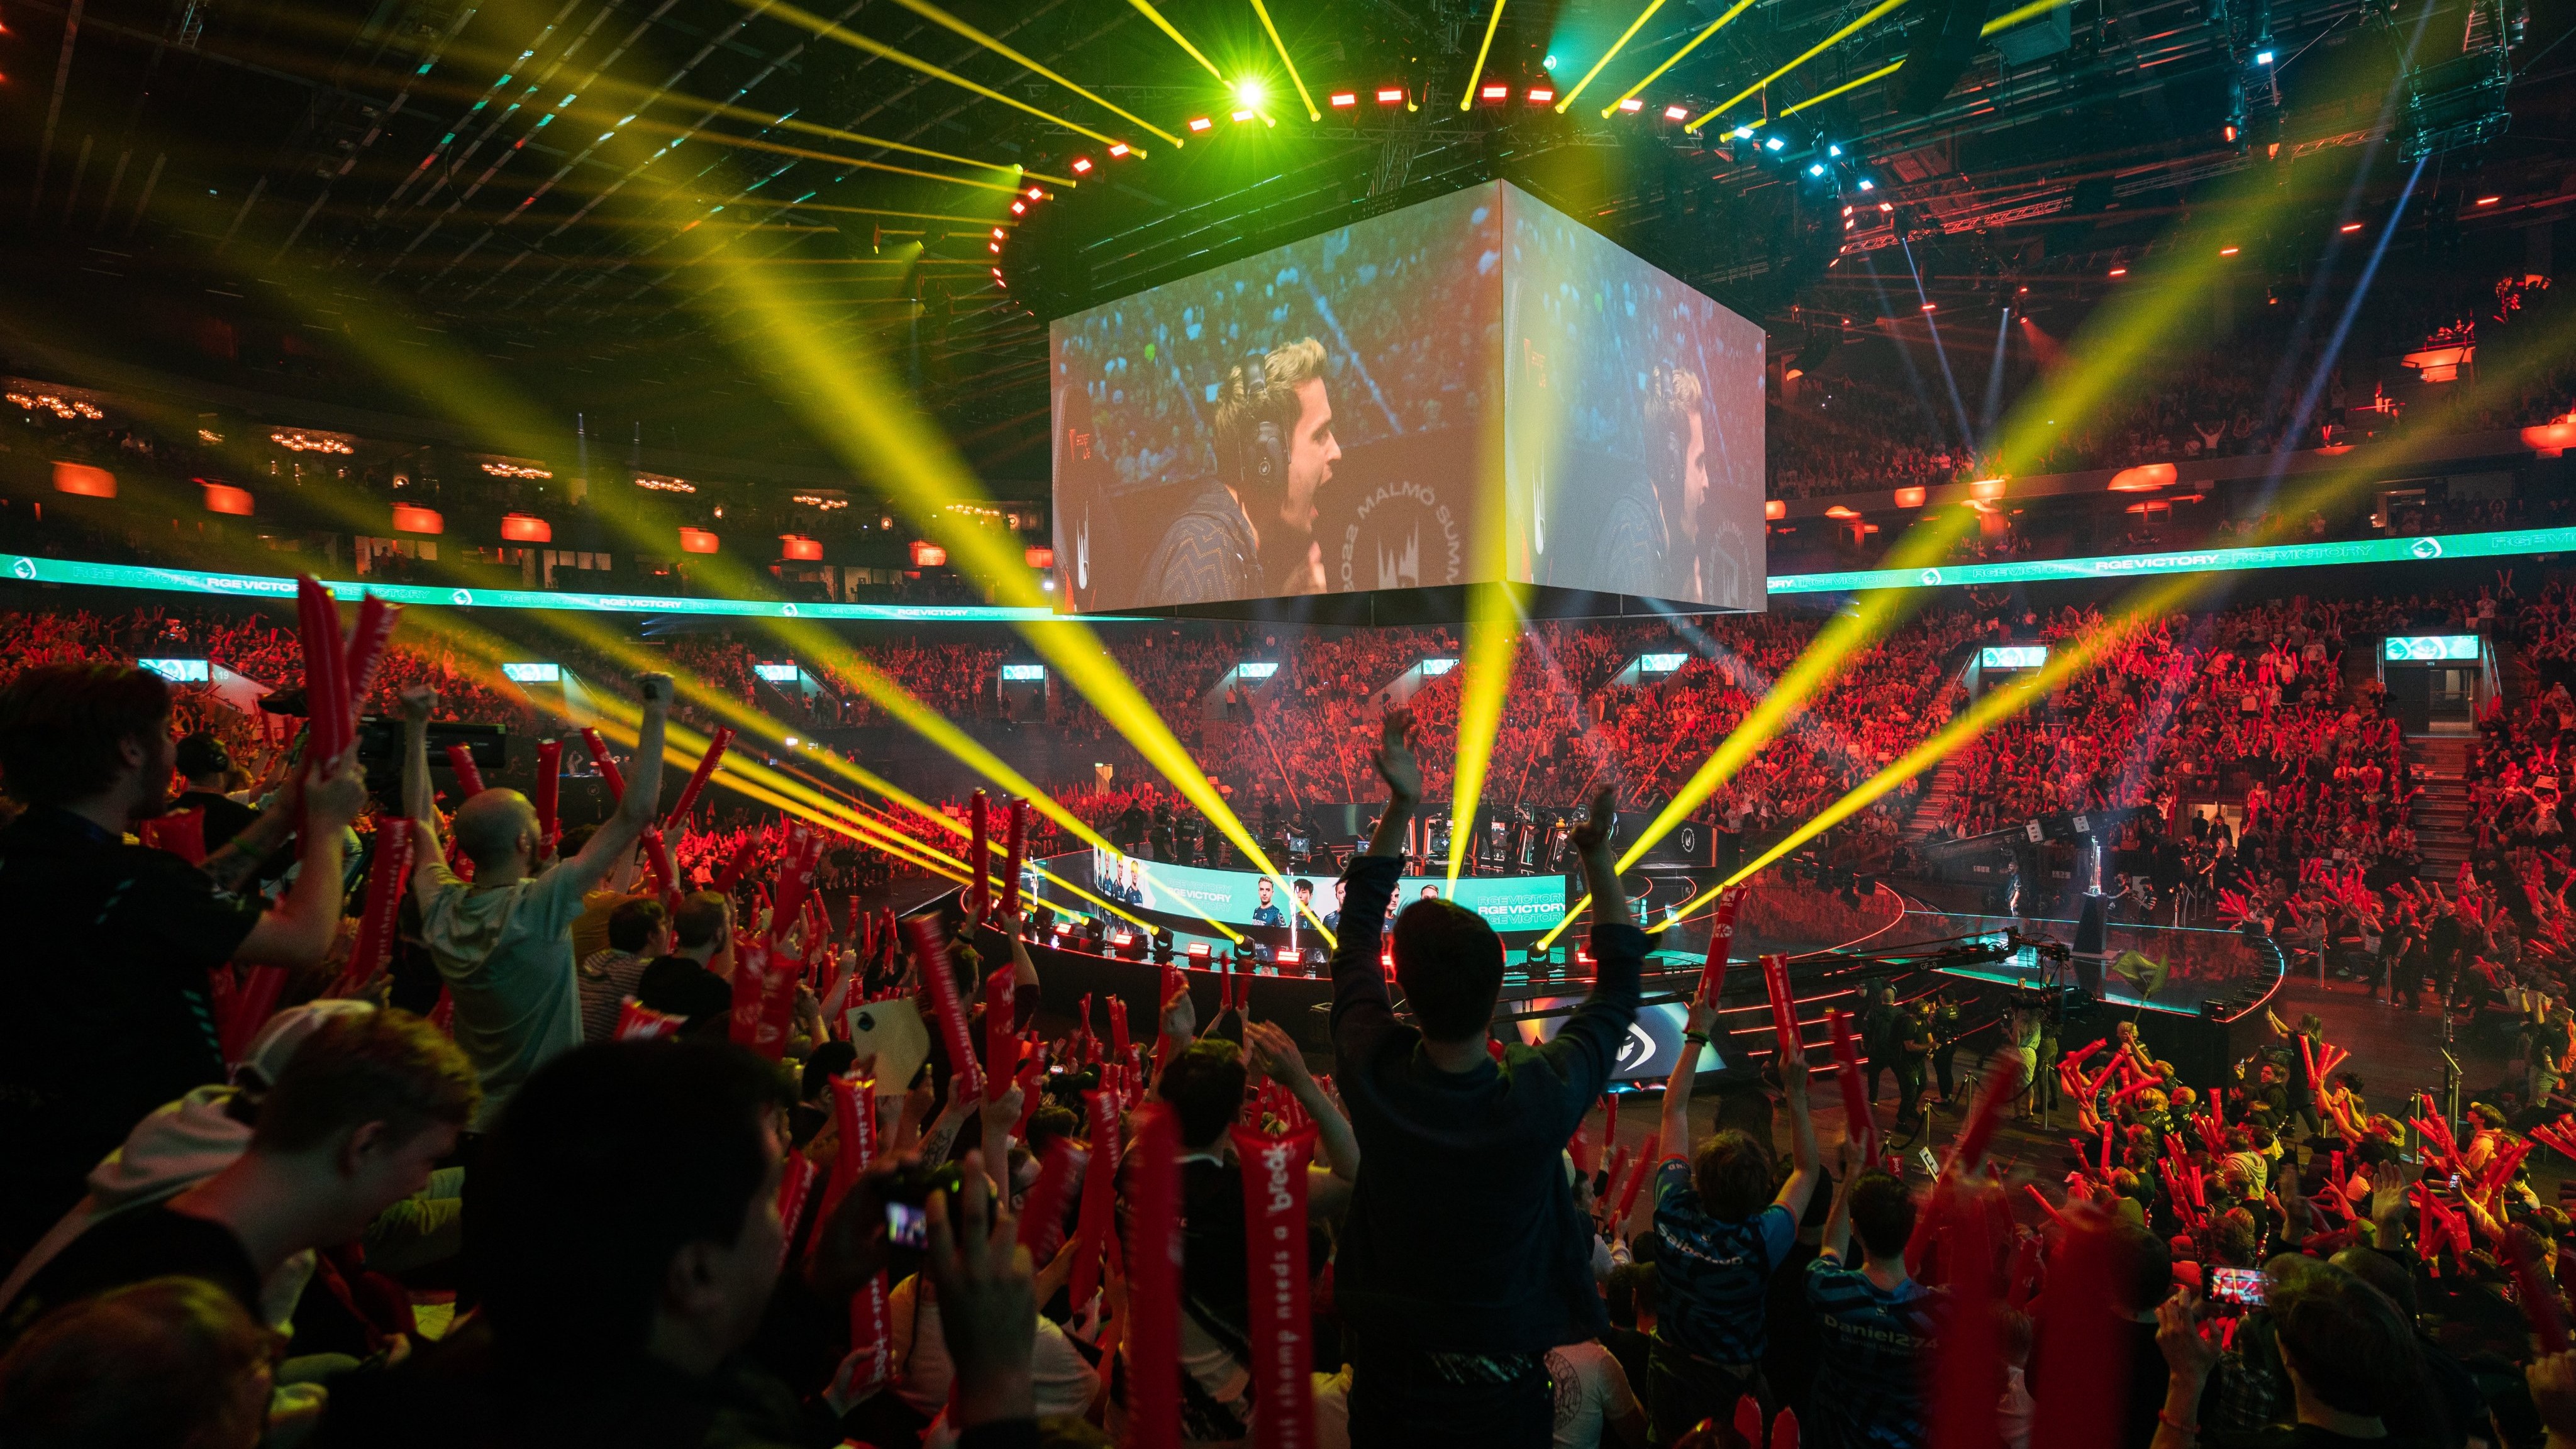 Big changes coming to international LoL esports events in 2023 